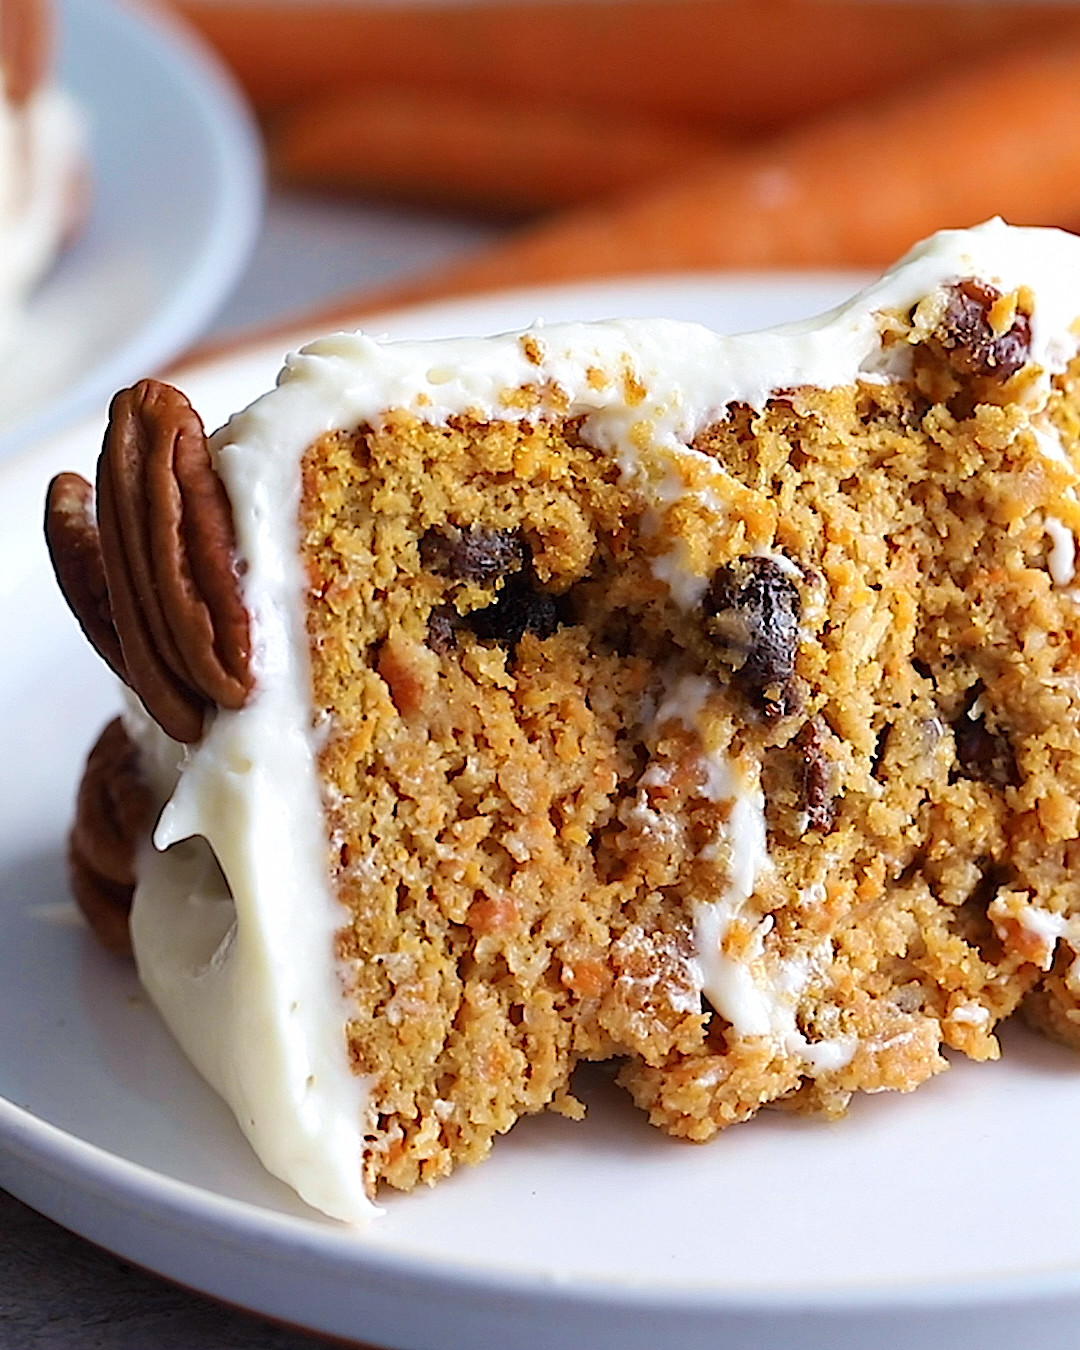 Low Calorie Carrot Cake Recipe
 The BEST moist healthy carrot cake you’ll ever eat made